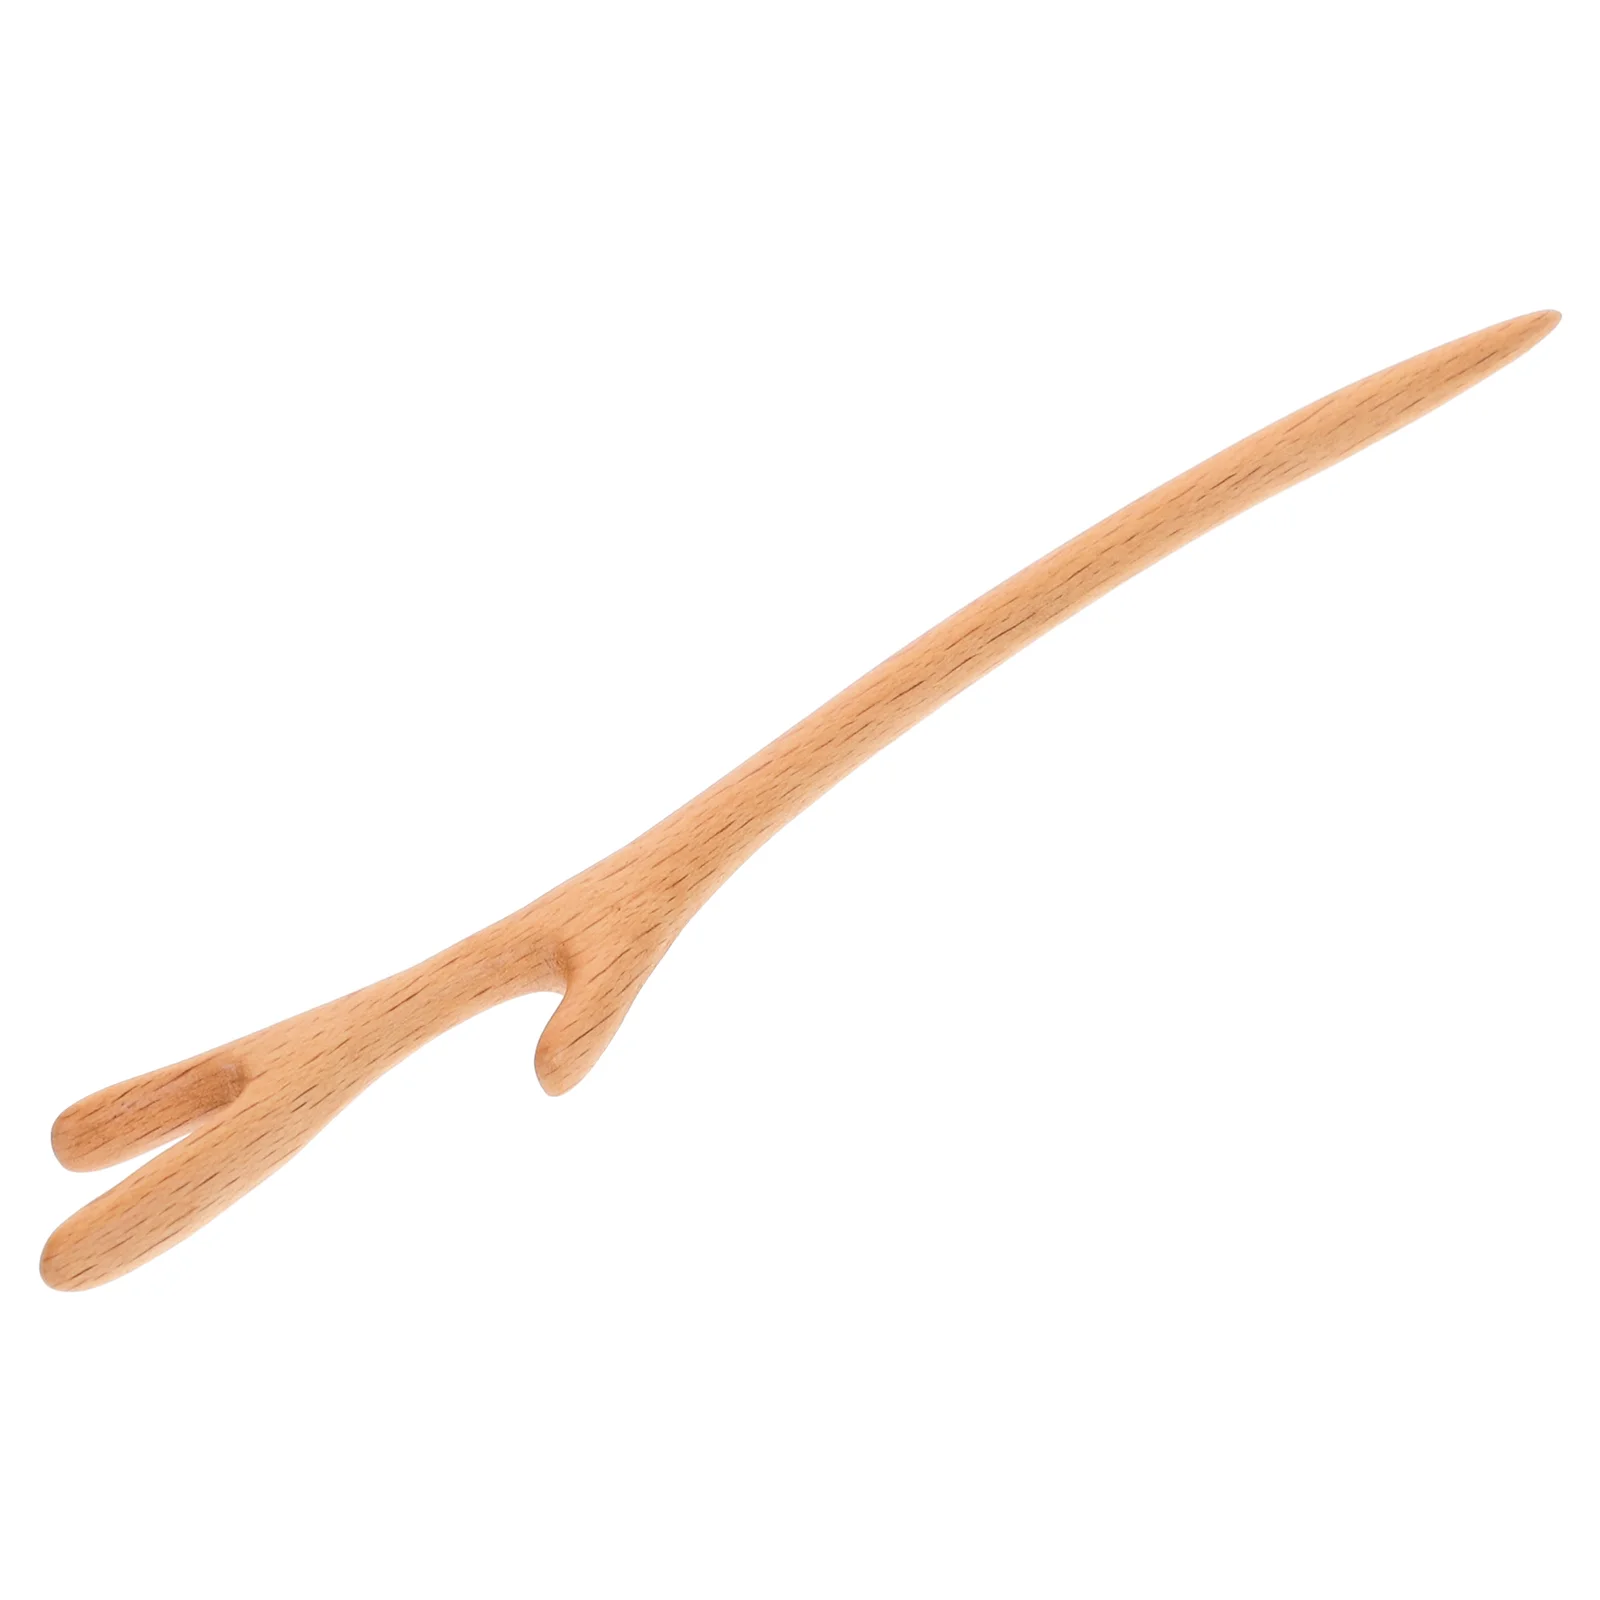 

Peach Wood Hairpin Retro Classical Ethnic Style Headdress Engraved Accessories (antlers) Dryer Tools